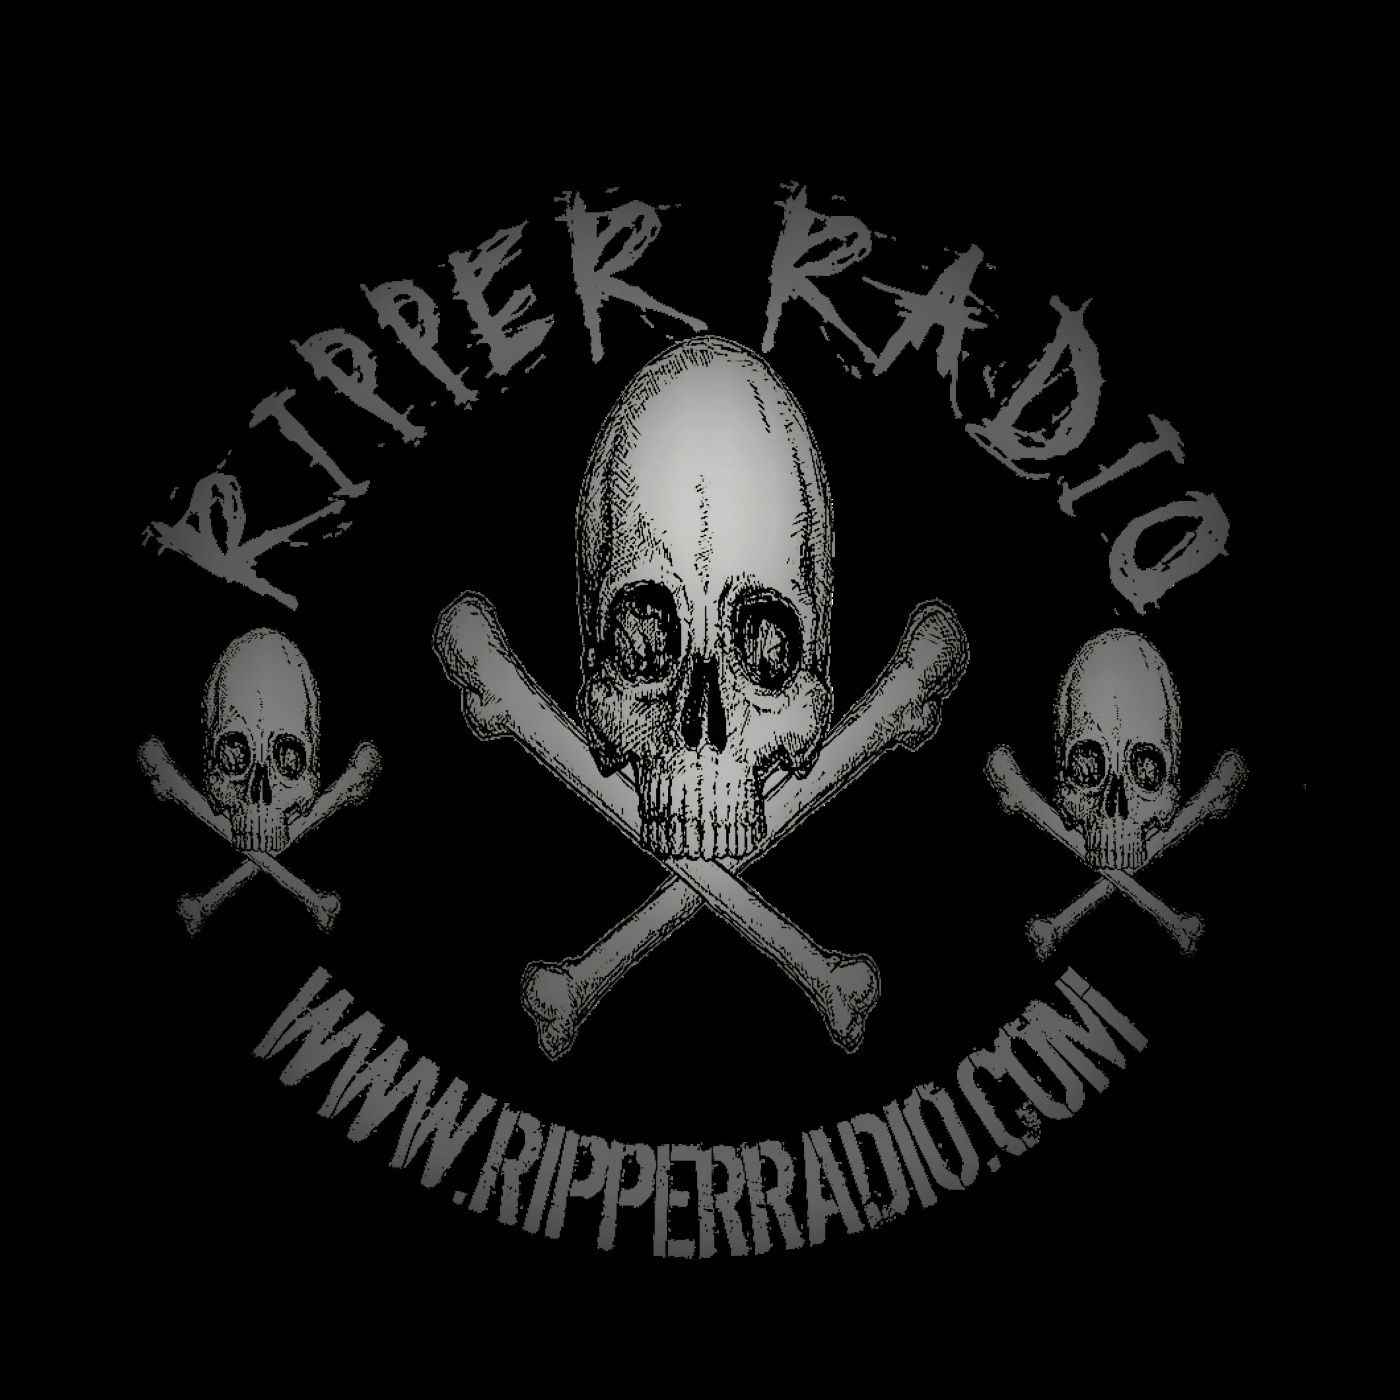 Ripper Podcast Free For All 9.23.20